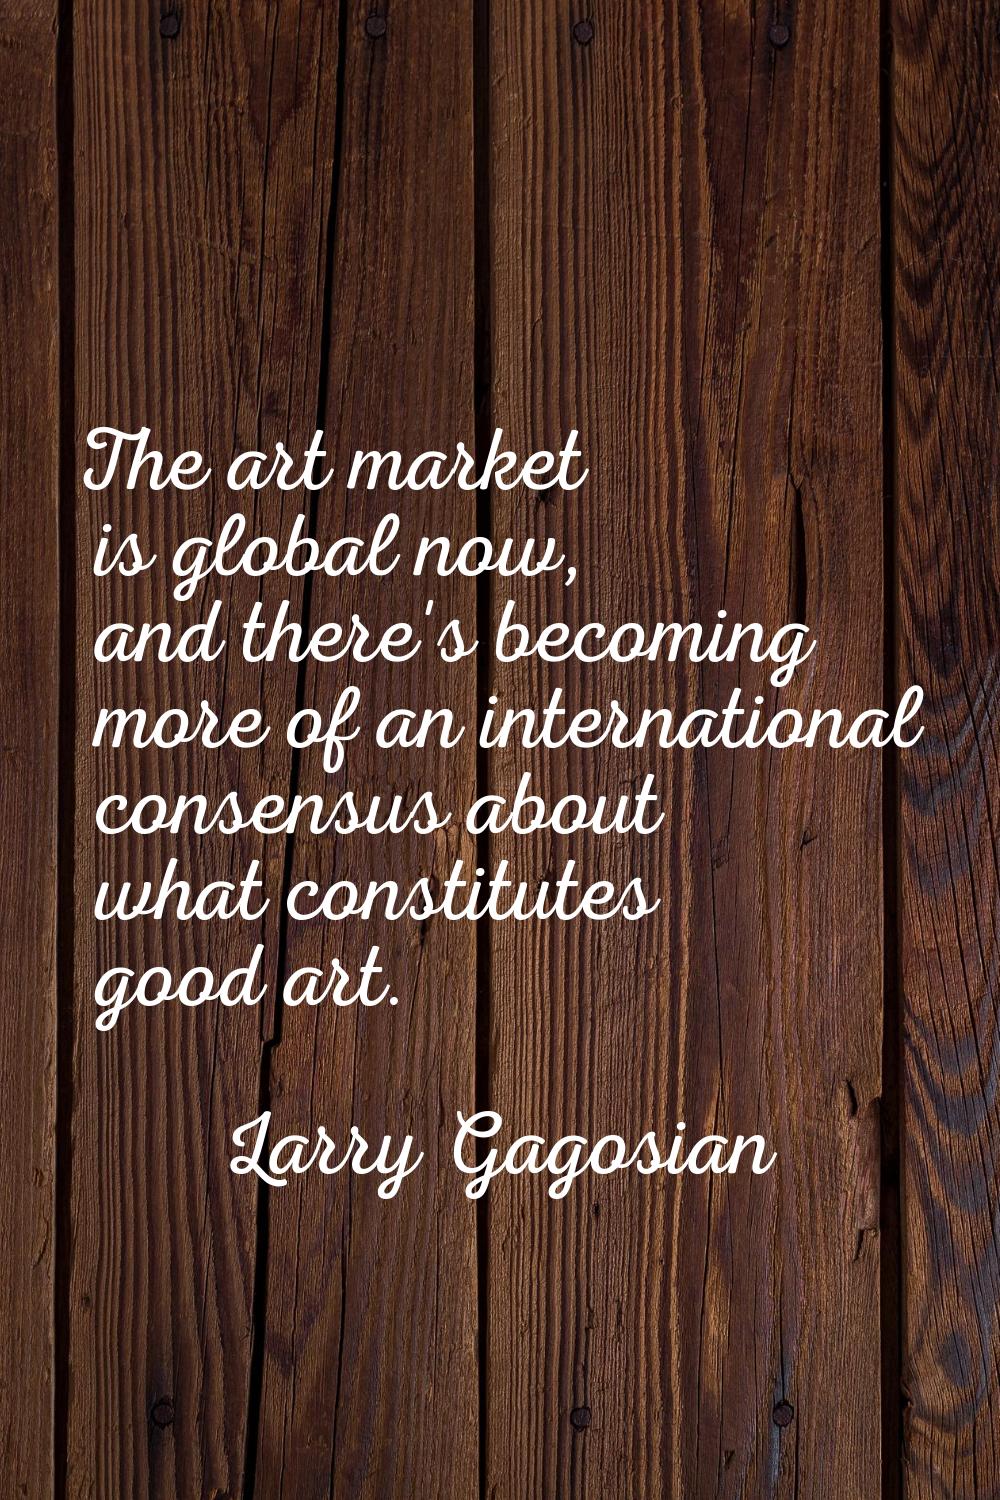 The art market is global now, and there's becoming more of an international consensus about what co